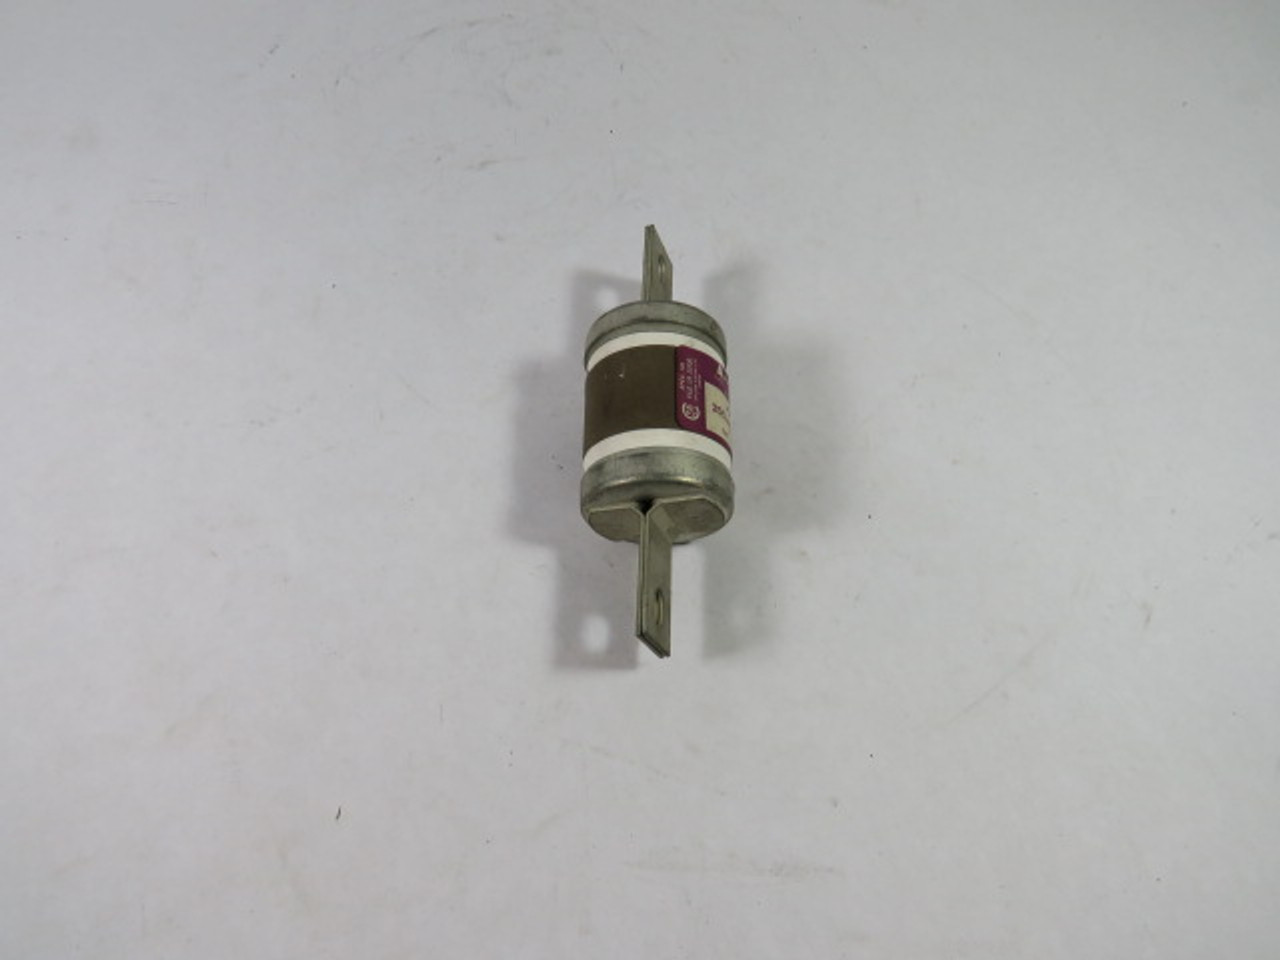 Appleton 61250 Current and Energy Limiting Fuse 250A 600V USED